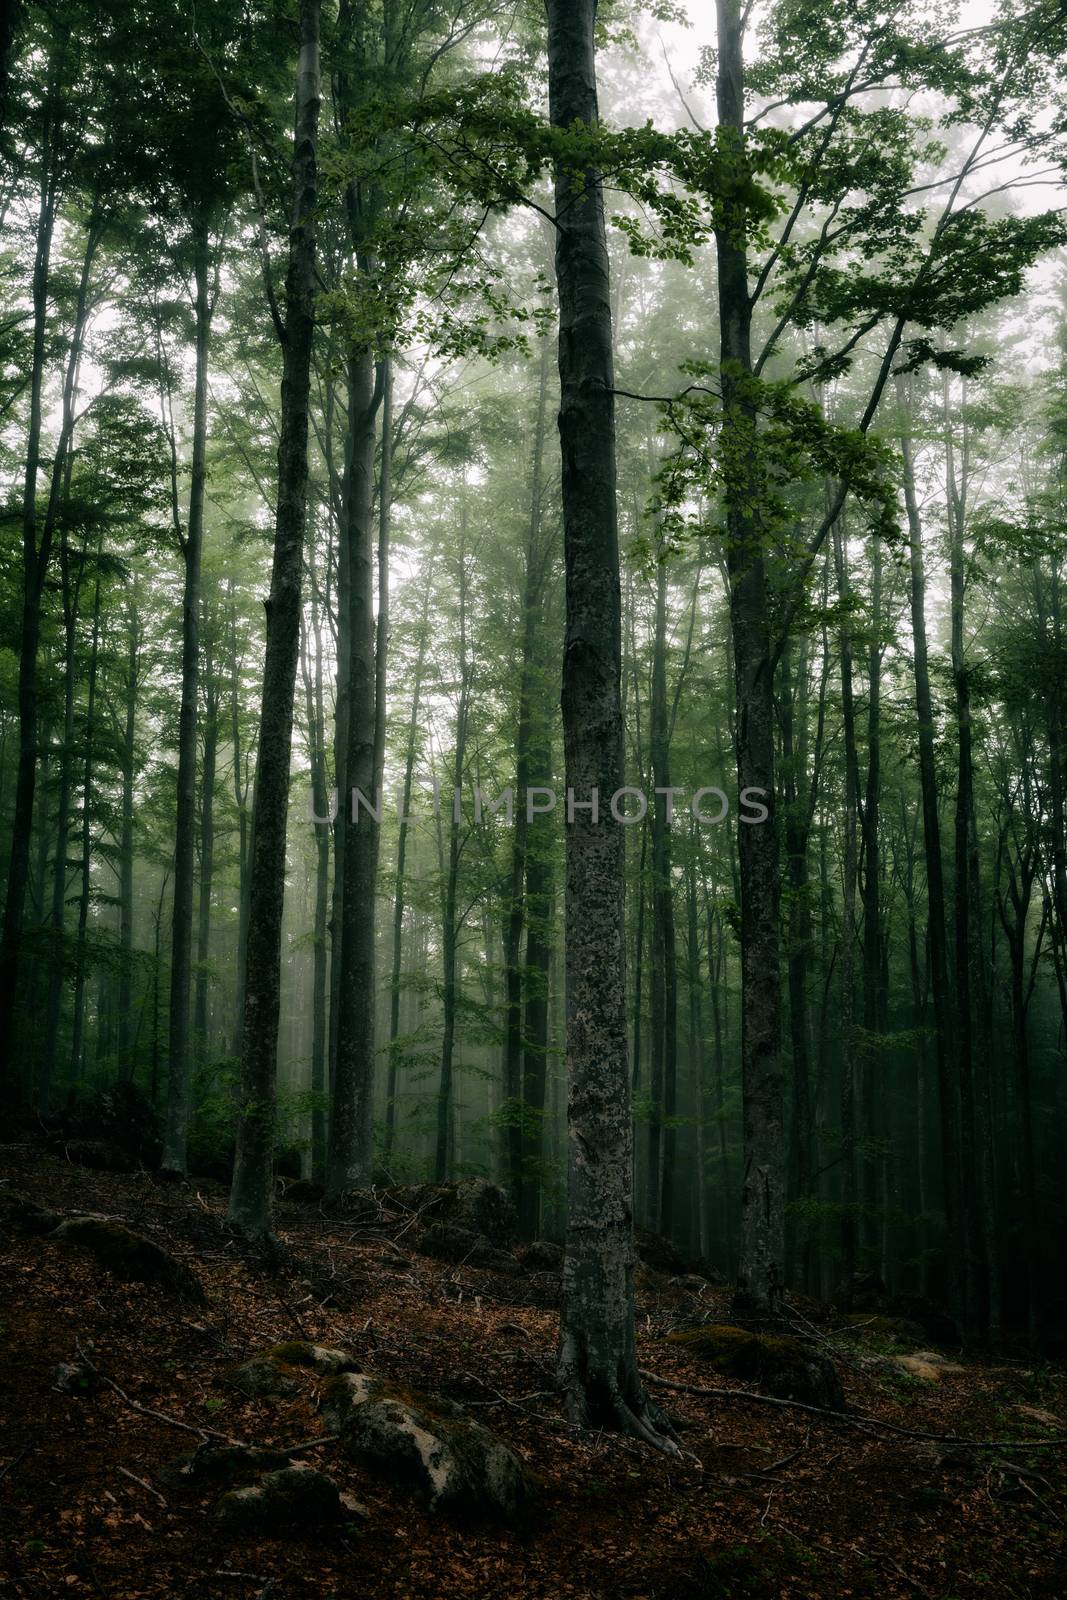 Mysterious dark atmosphere in the forest with fog